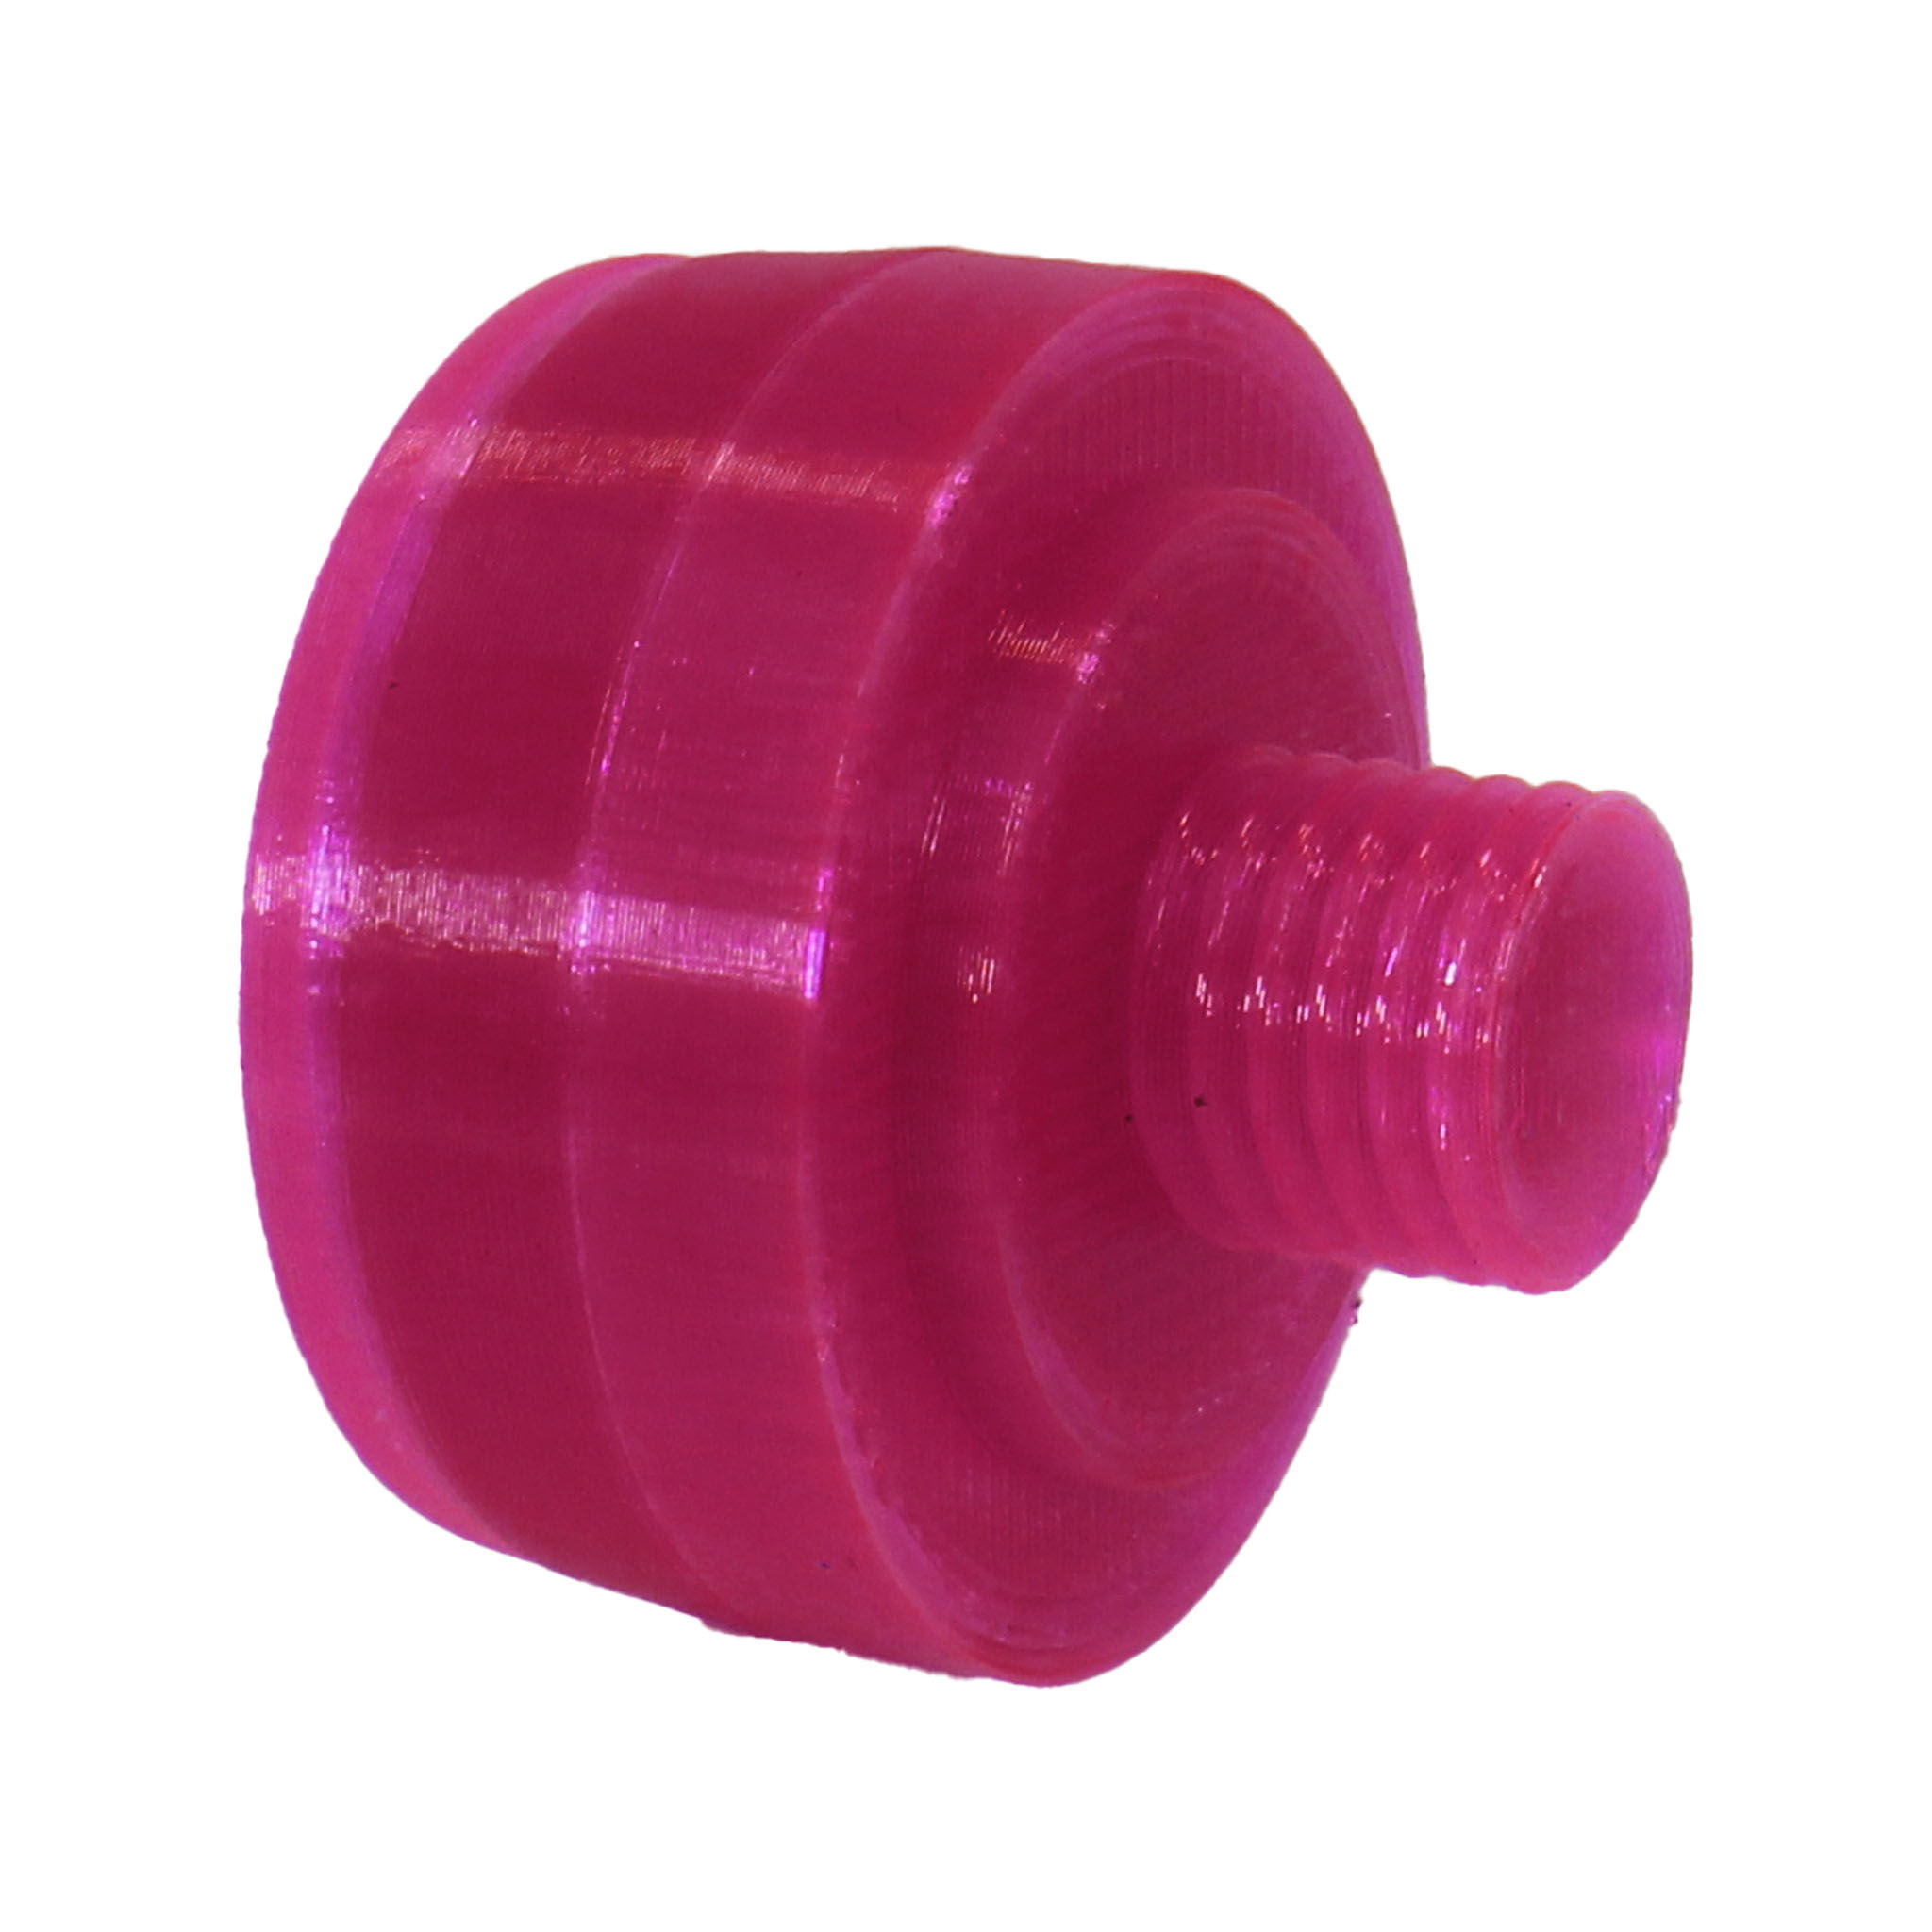 Elevation Wheel Co Replacement Head for Park HMR-4 Shop Hammer, Pink